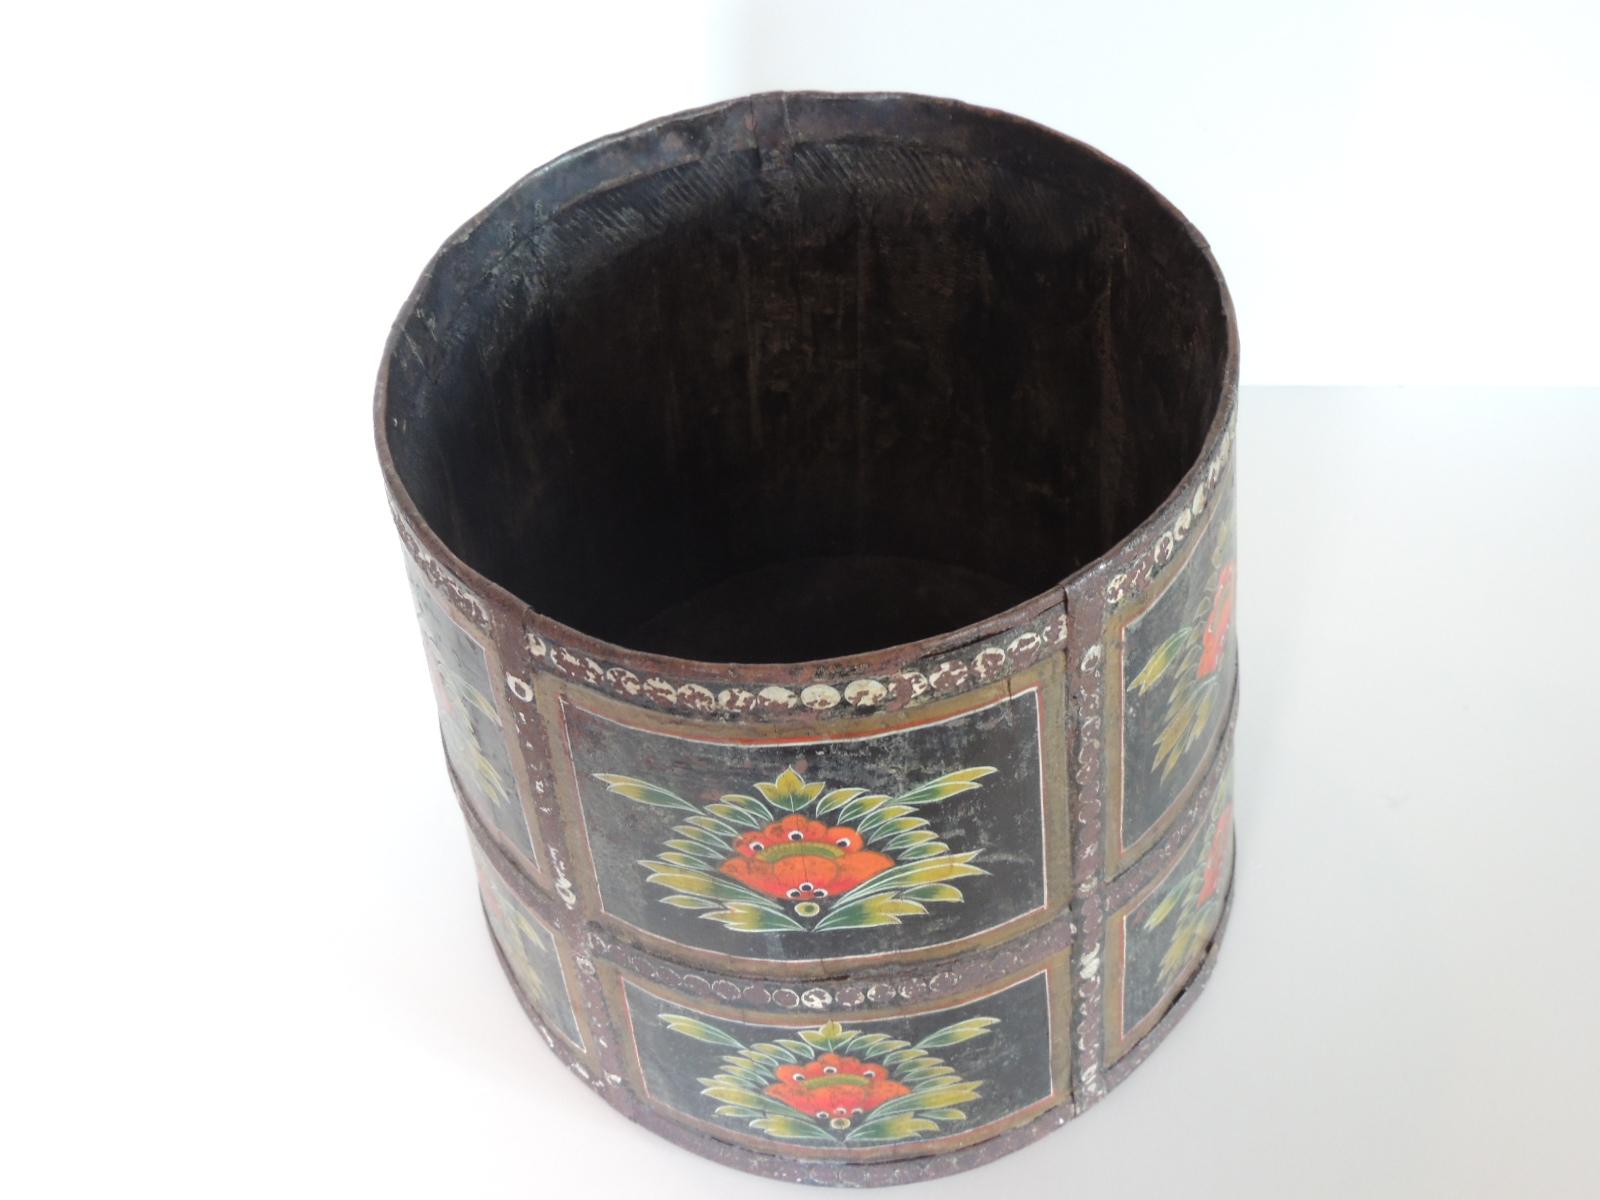 Vintage hand painted round Indian planter.
Conical shape vessel (barrel construction style)
Flowers in orange over a black lacquered finish. With small metal rustic fittings.
Size: 9.5